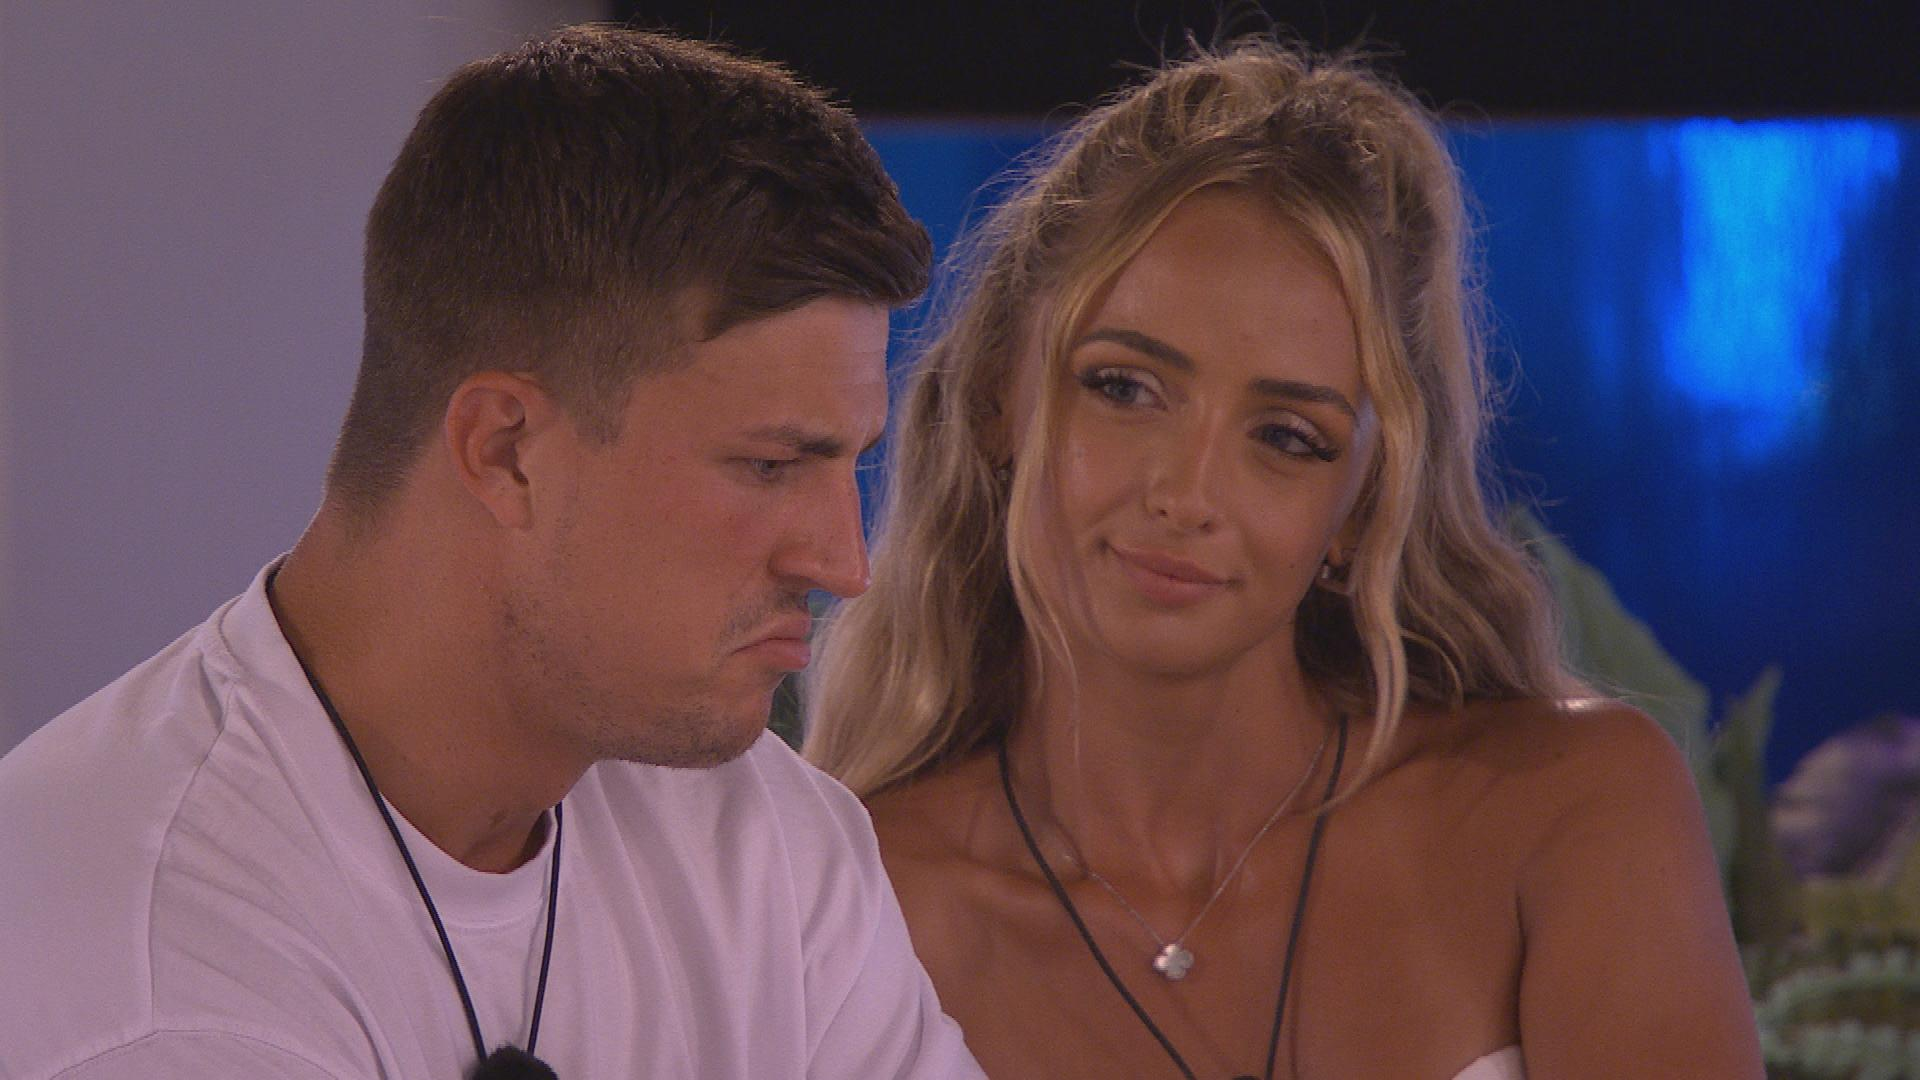 Mitchel and Abi argue over Ella B in Love Island teaser ‘You’re